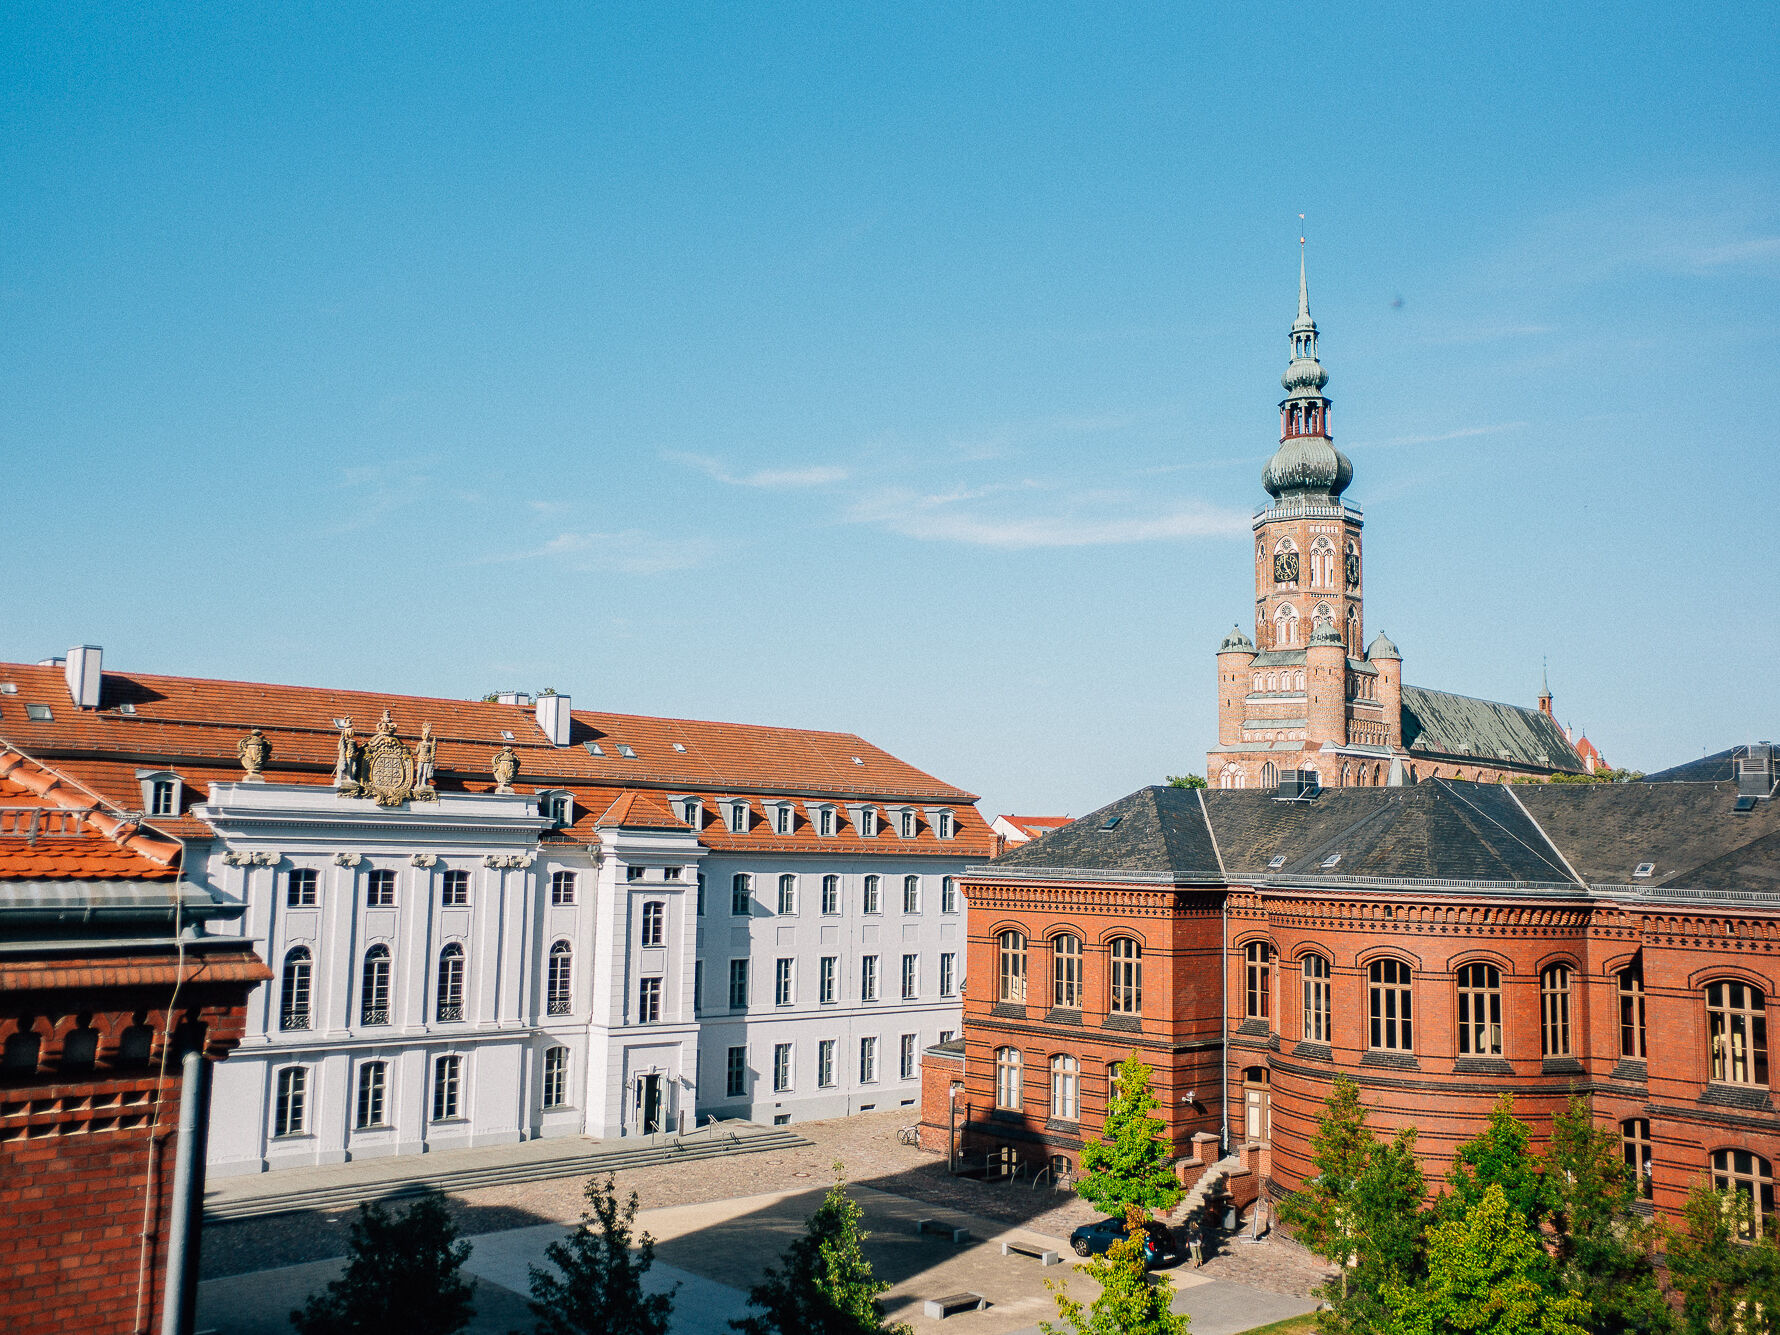 Symbolic image of the Old Town Campus of the University of Greifswald, © Till Junker, 2018